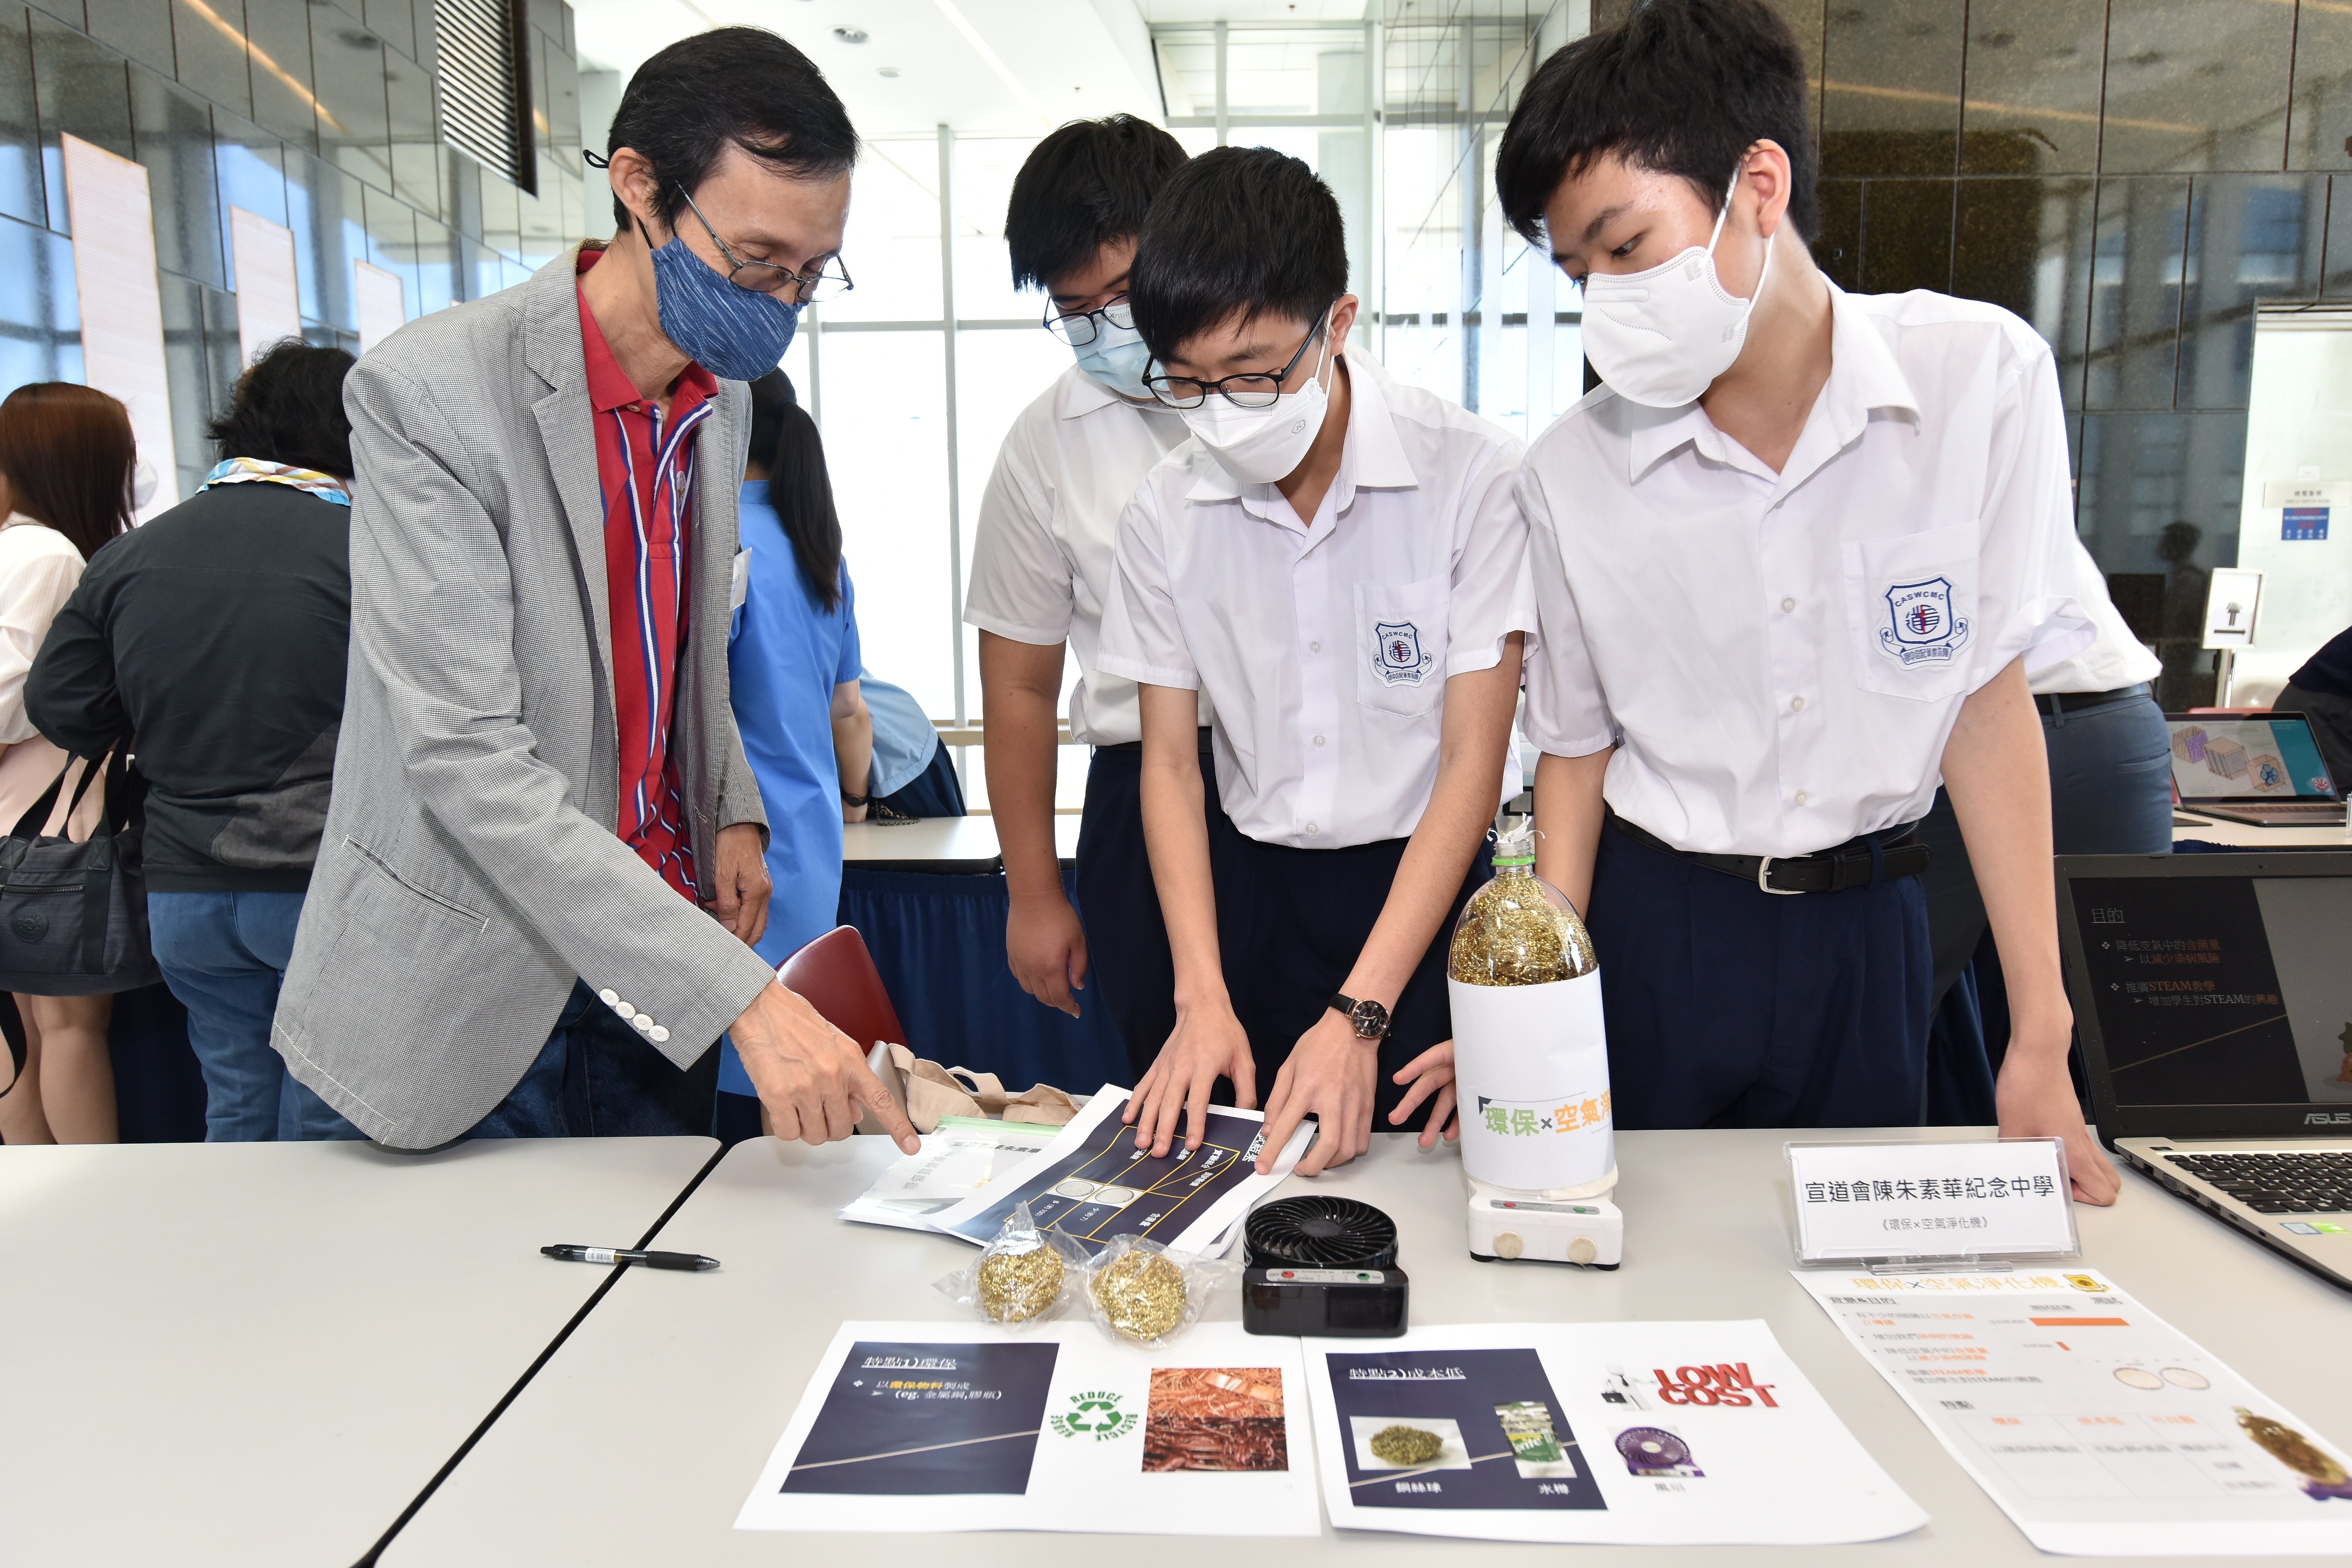 Guests touring the students’ works and admiring their creativity on solving Hong Kong’s air pollution issue. 